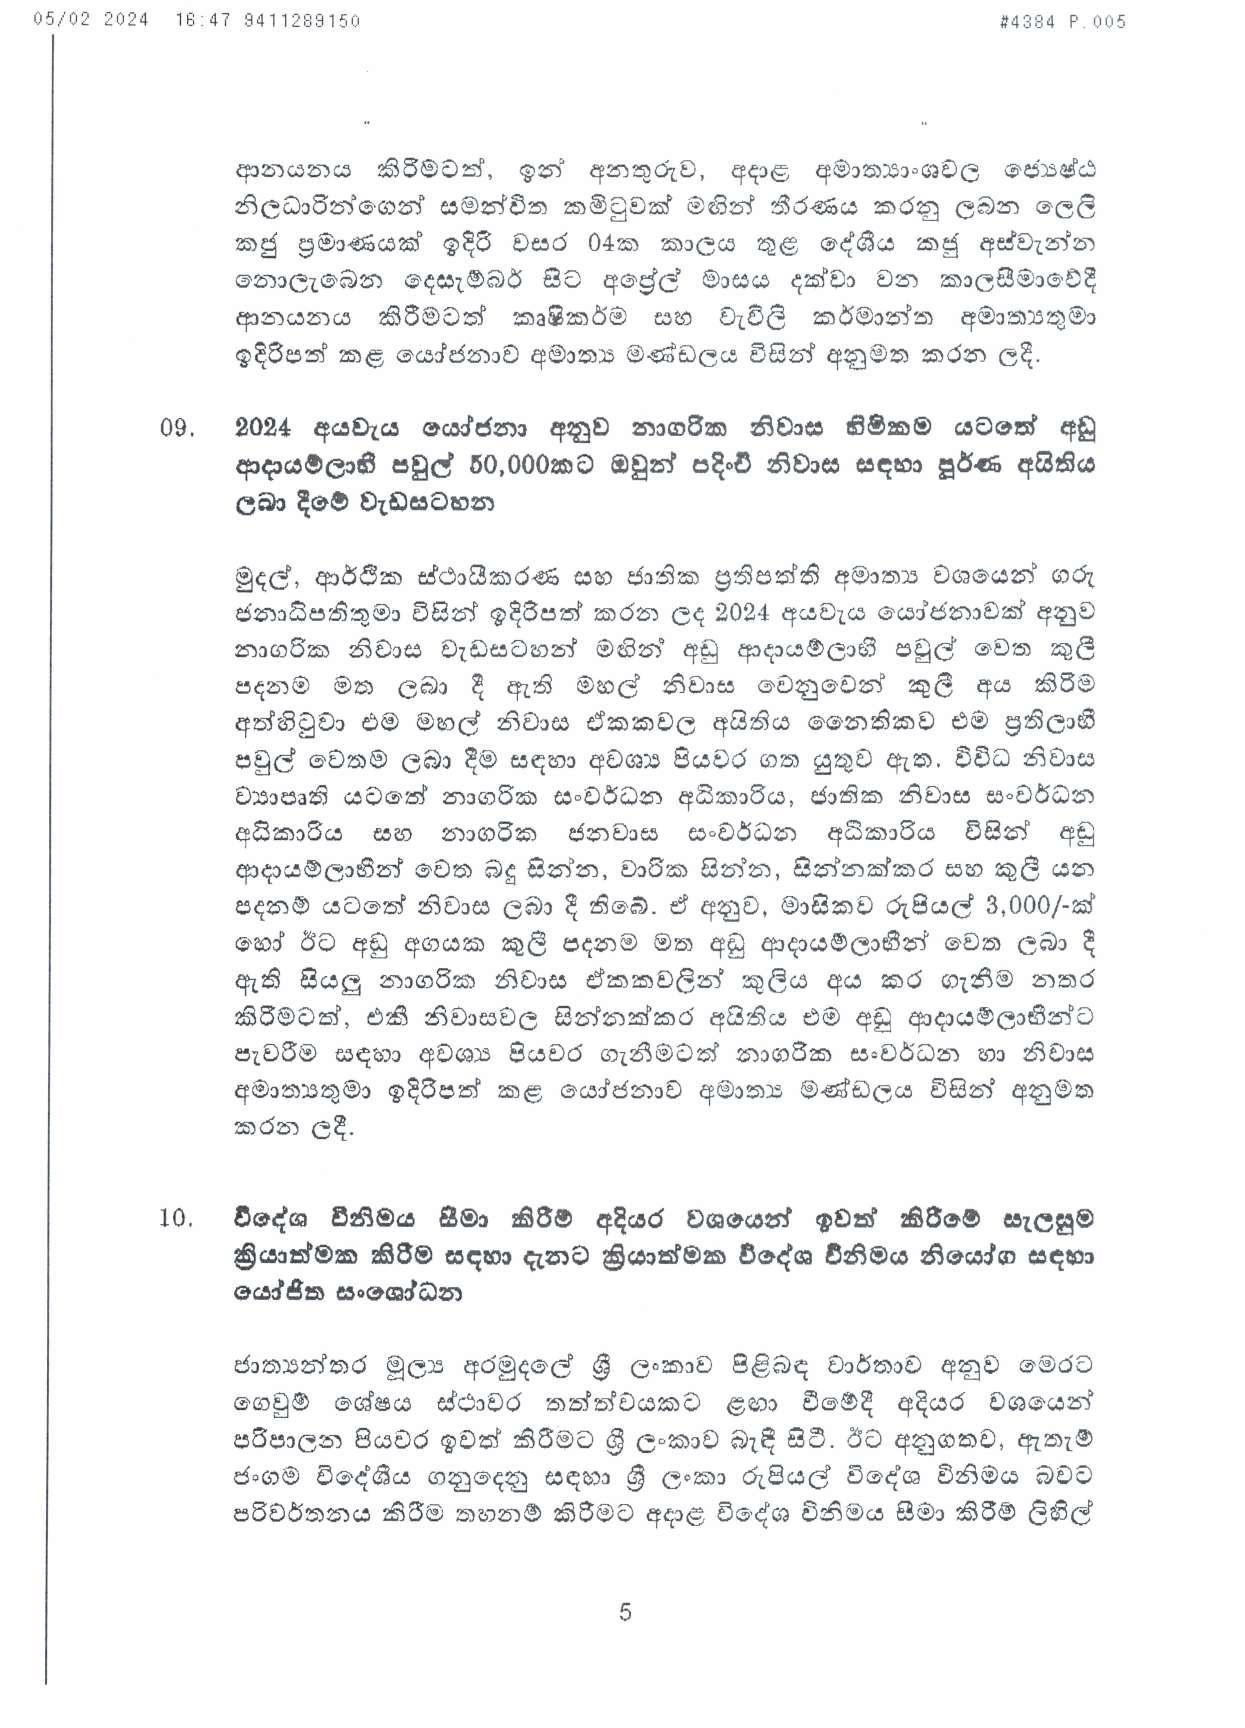 Cabinet Decision on 05.02.2024 page 005